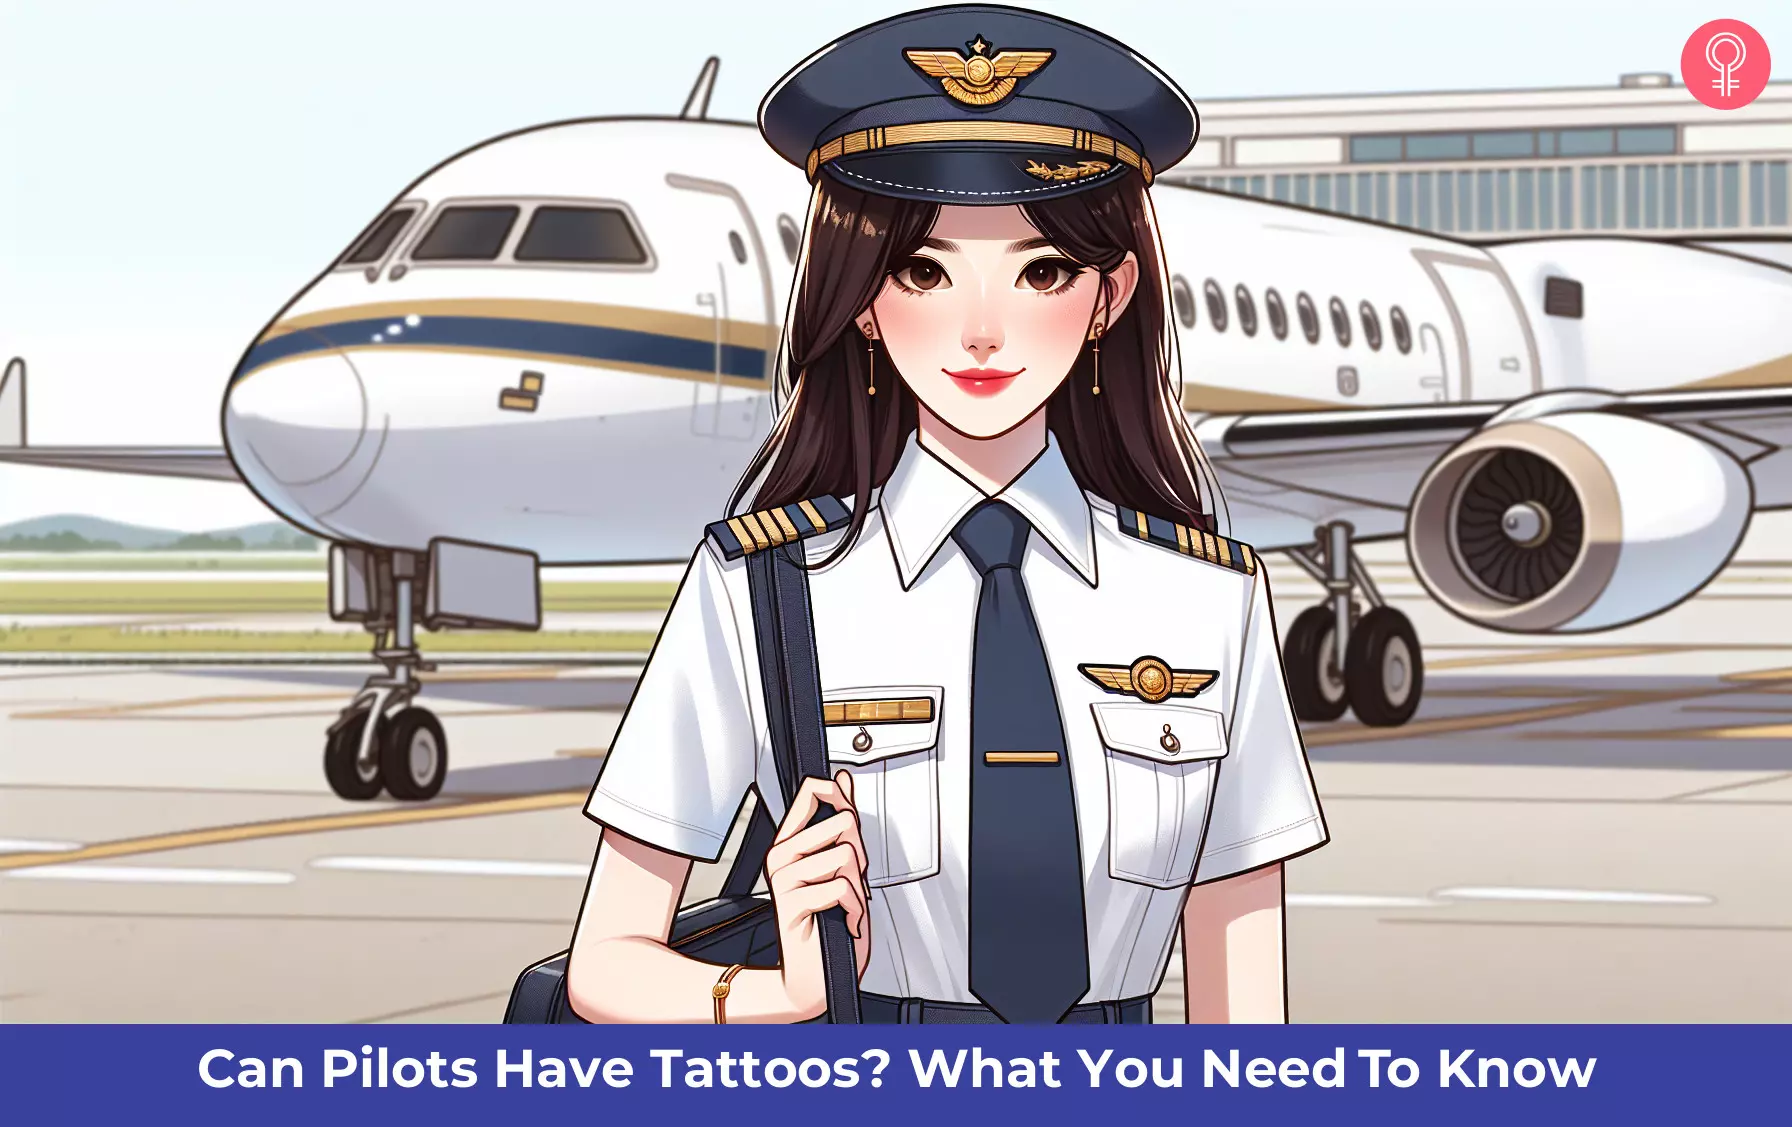 Can Pilots Have Tattoos? What You Need to Know